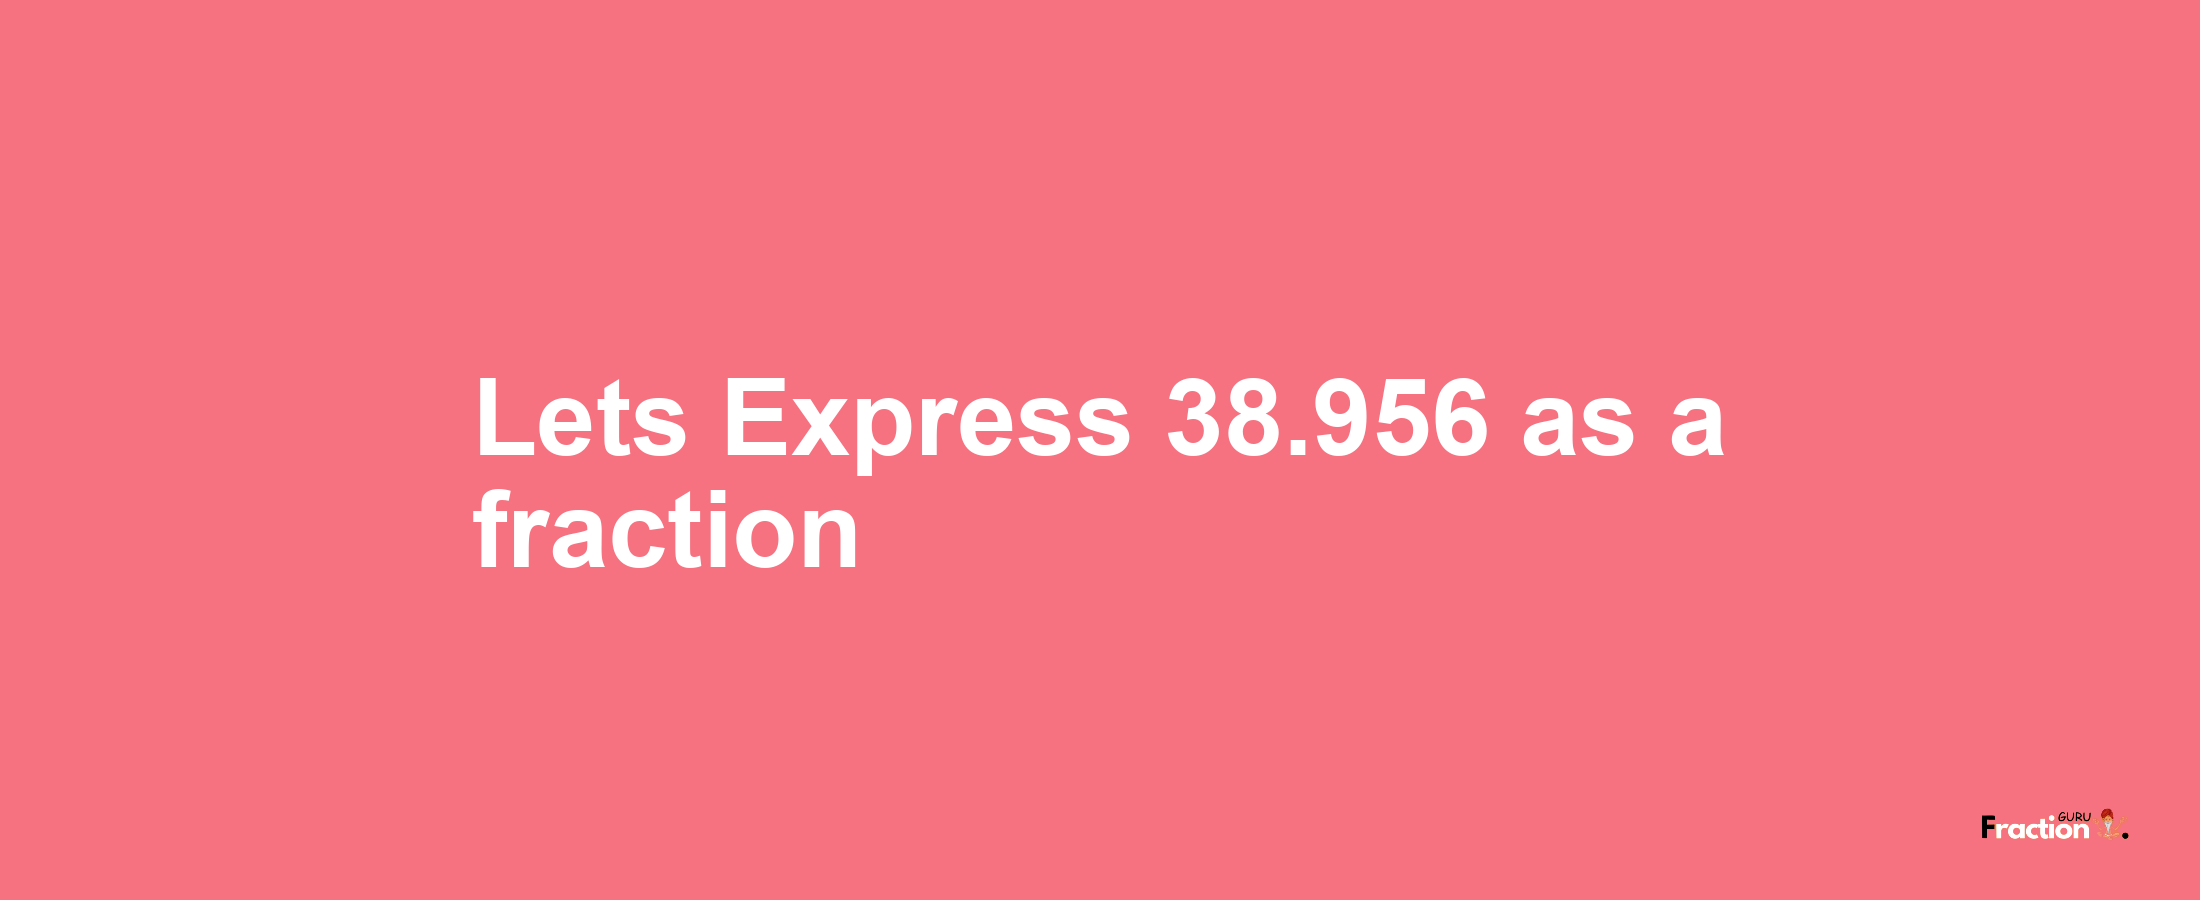 Lets Express 38.956 as afraction